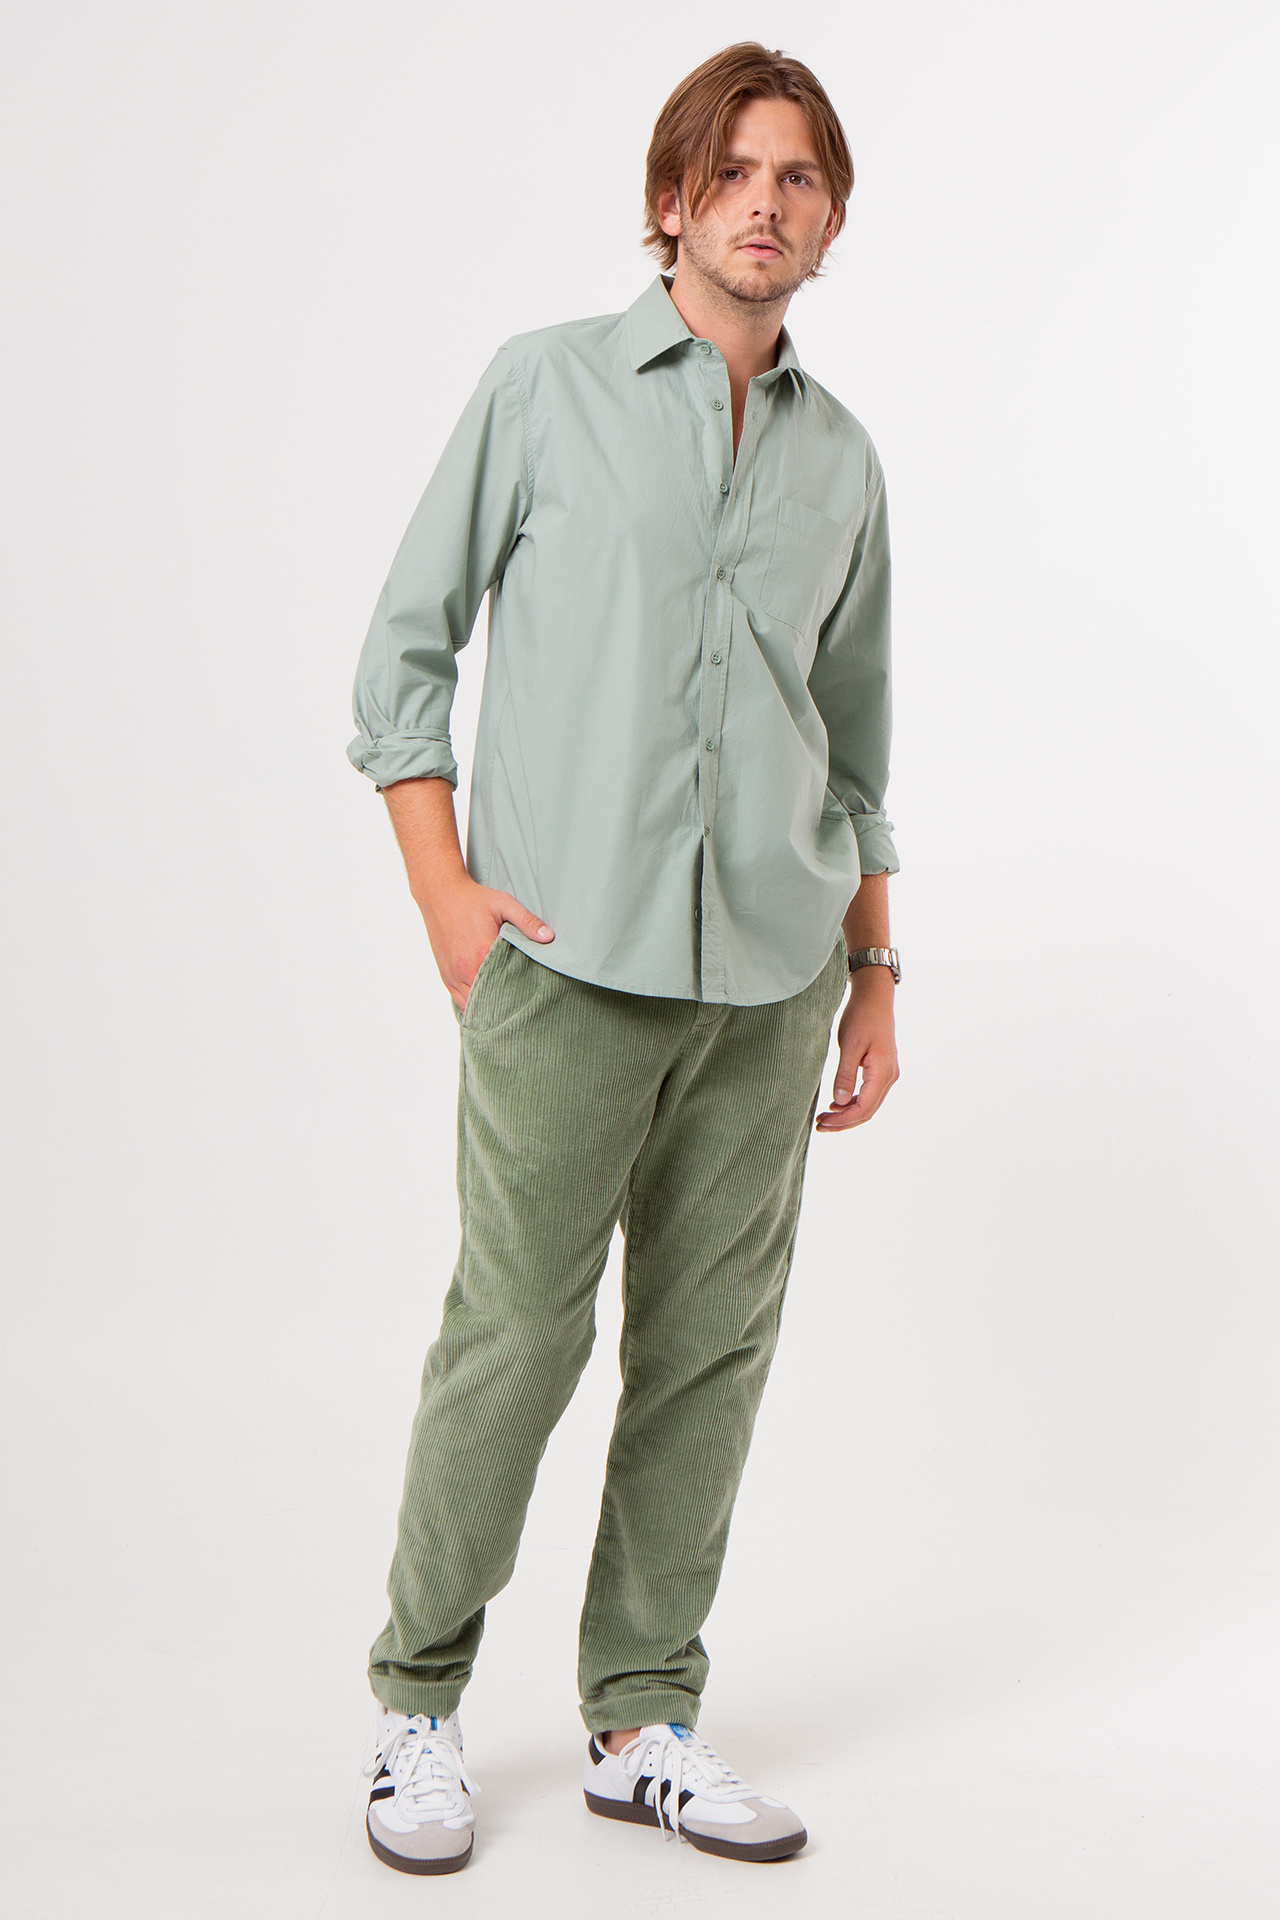 White Shirt with Olive Pants Casual Warm Weather Outfits For Men After 50  3 ideas  outfits  Lookastic